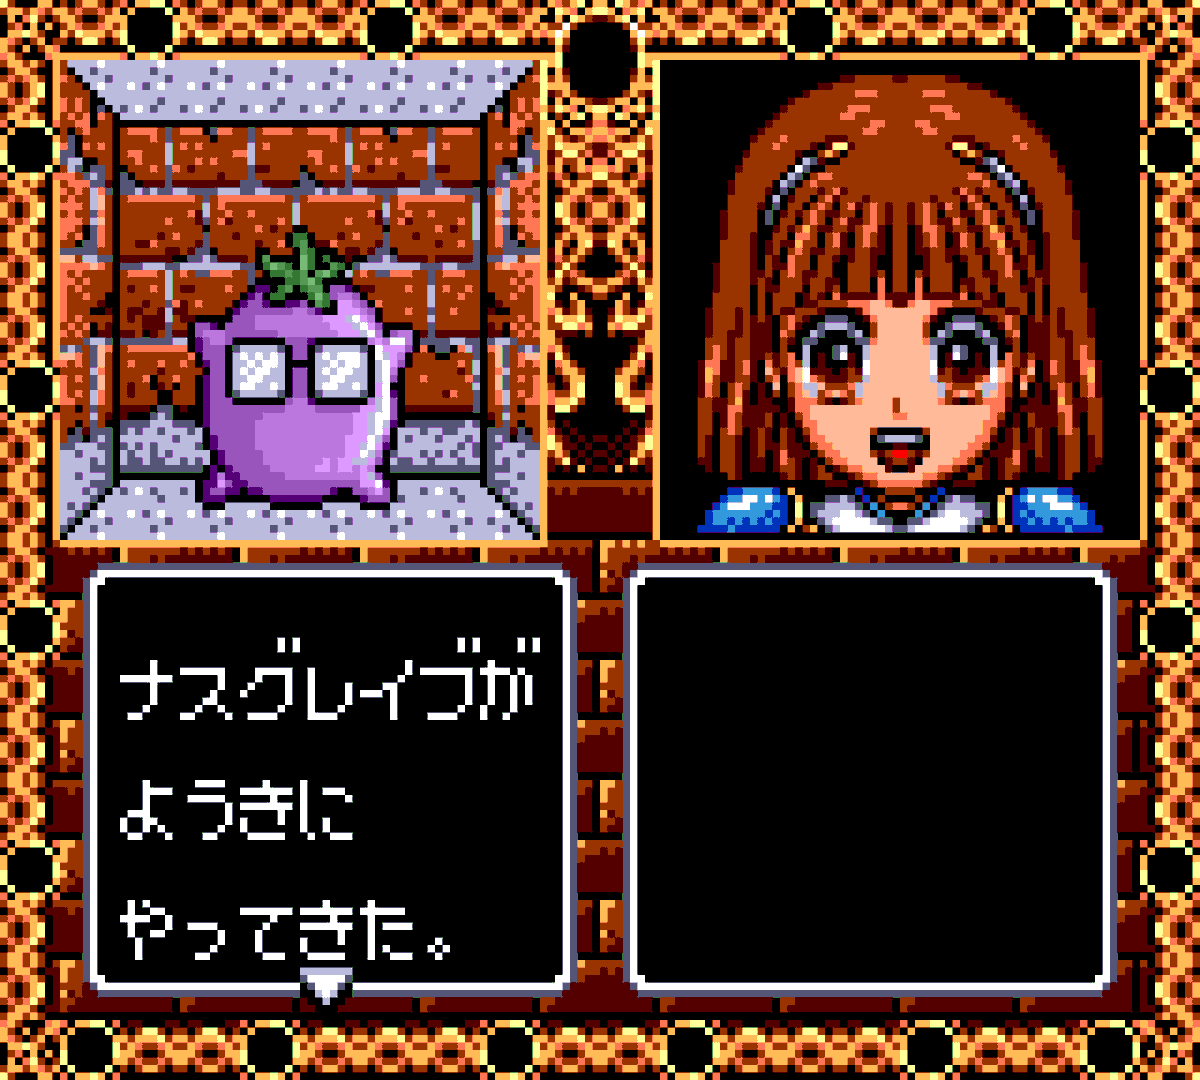 I feel whenever the game asks me a question, it's going to end badly.This time an, uh, eggplant ghost busted out and flailed their tiny arms at me. So I blew them up with ice magic and then pickled them in soy sauce.Yum~~